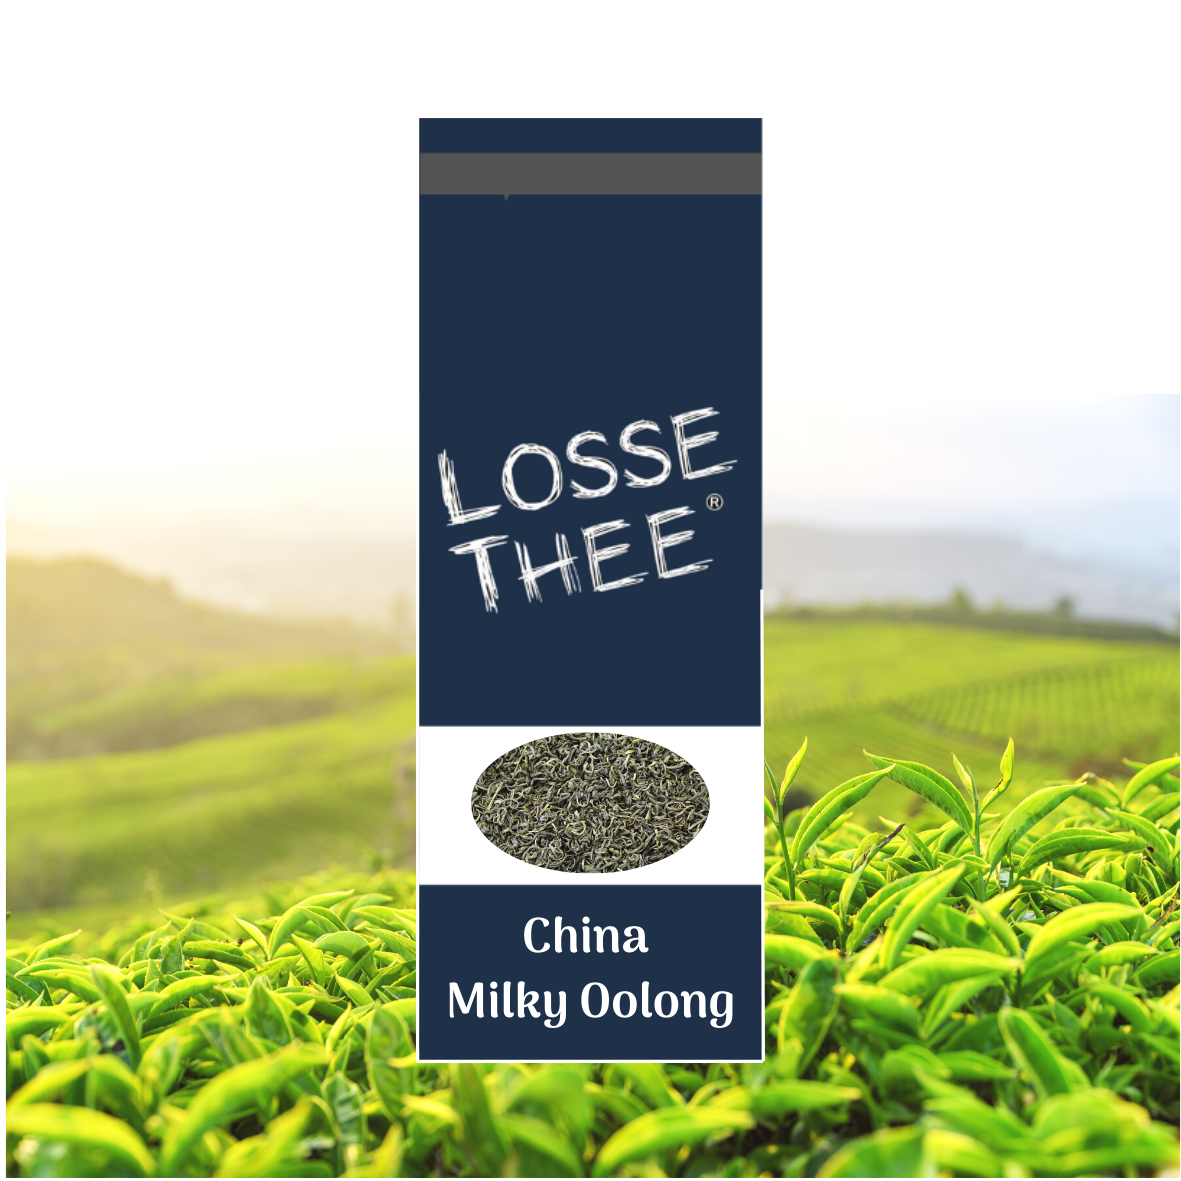 LOSSE THEE Groene China Milky Oolong thee